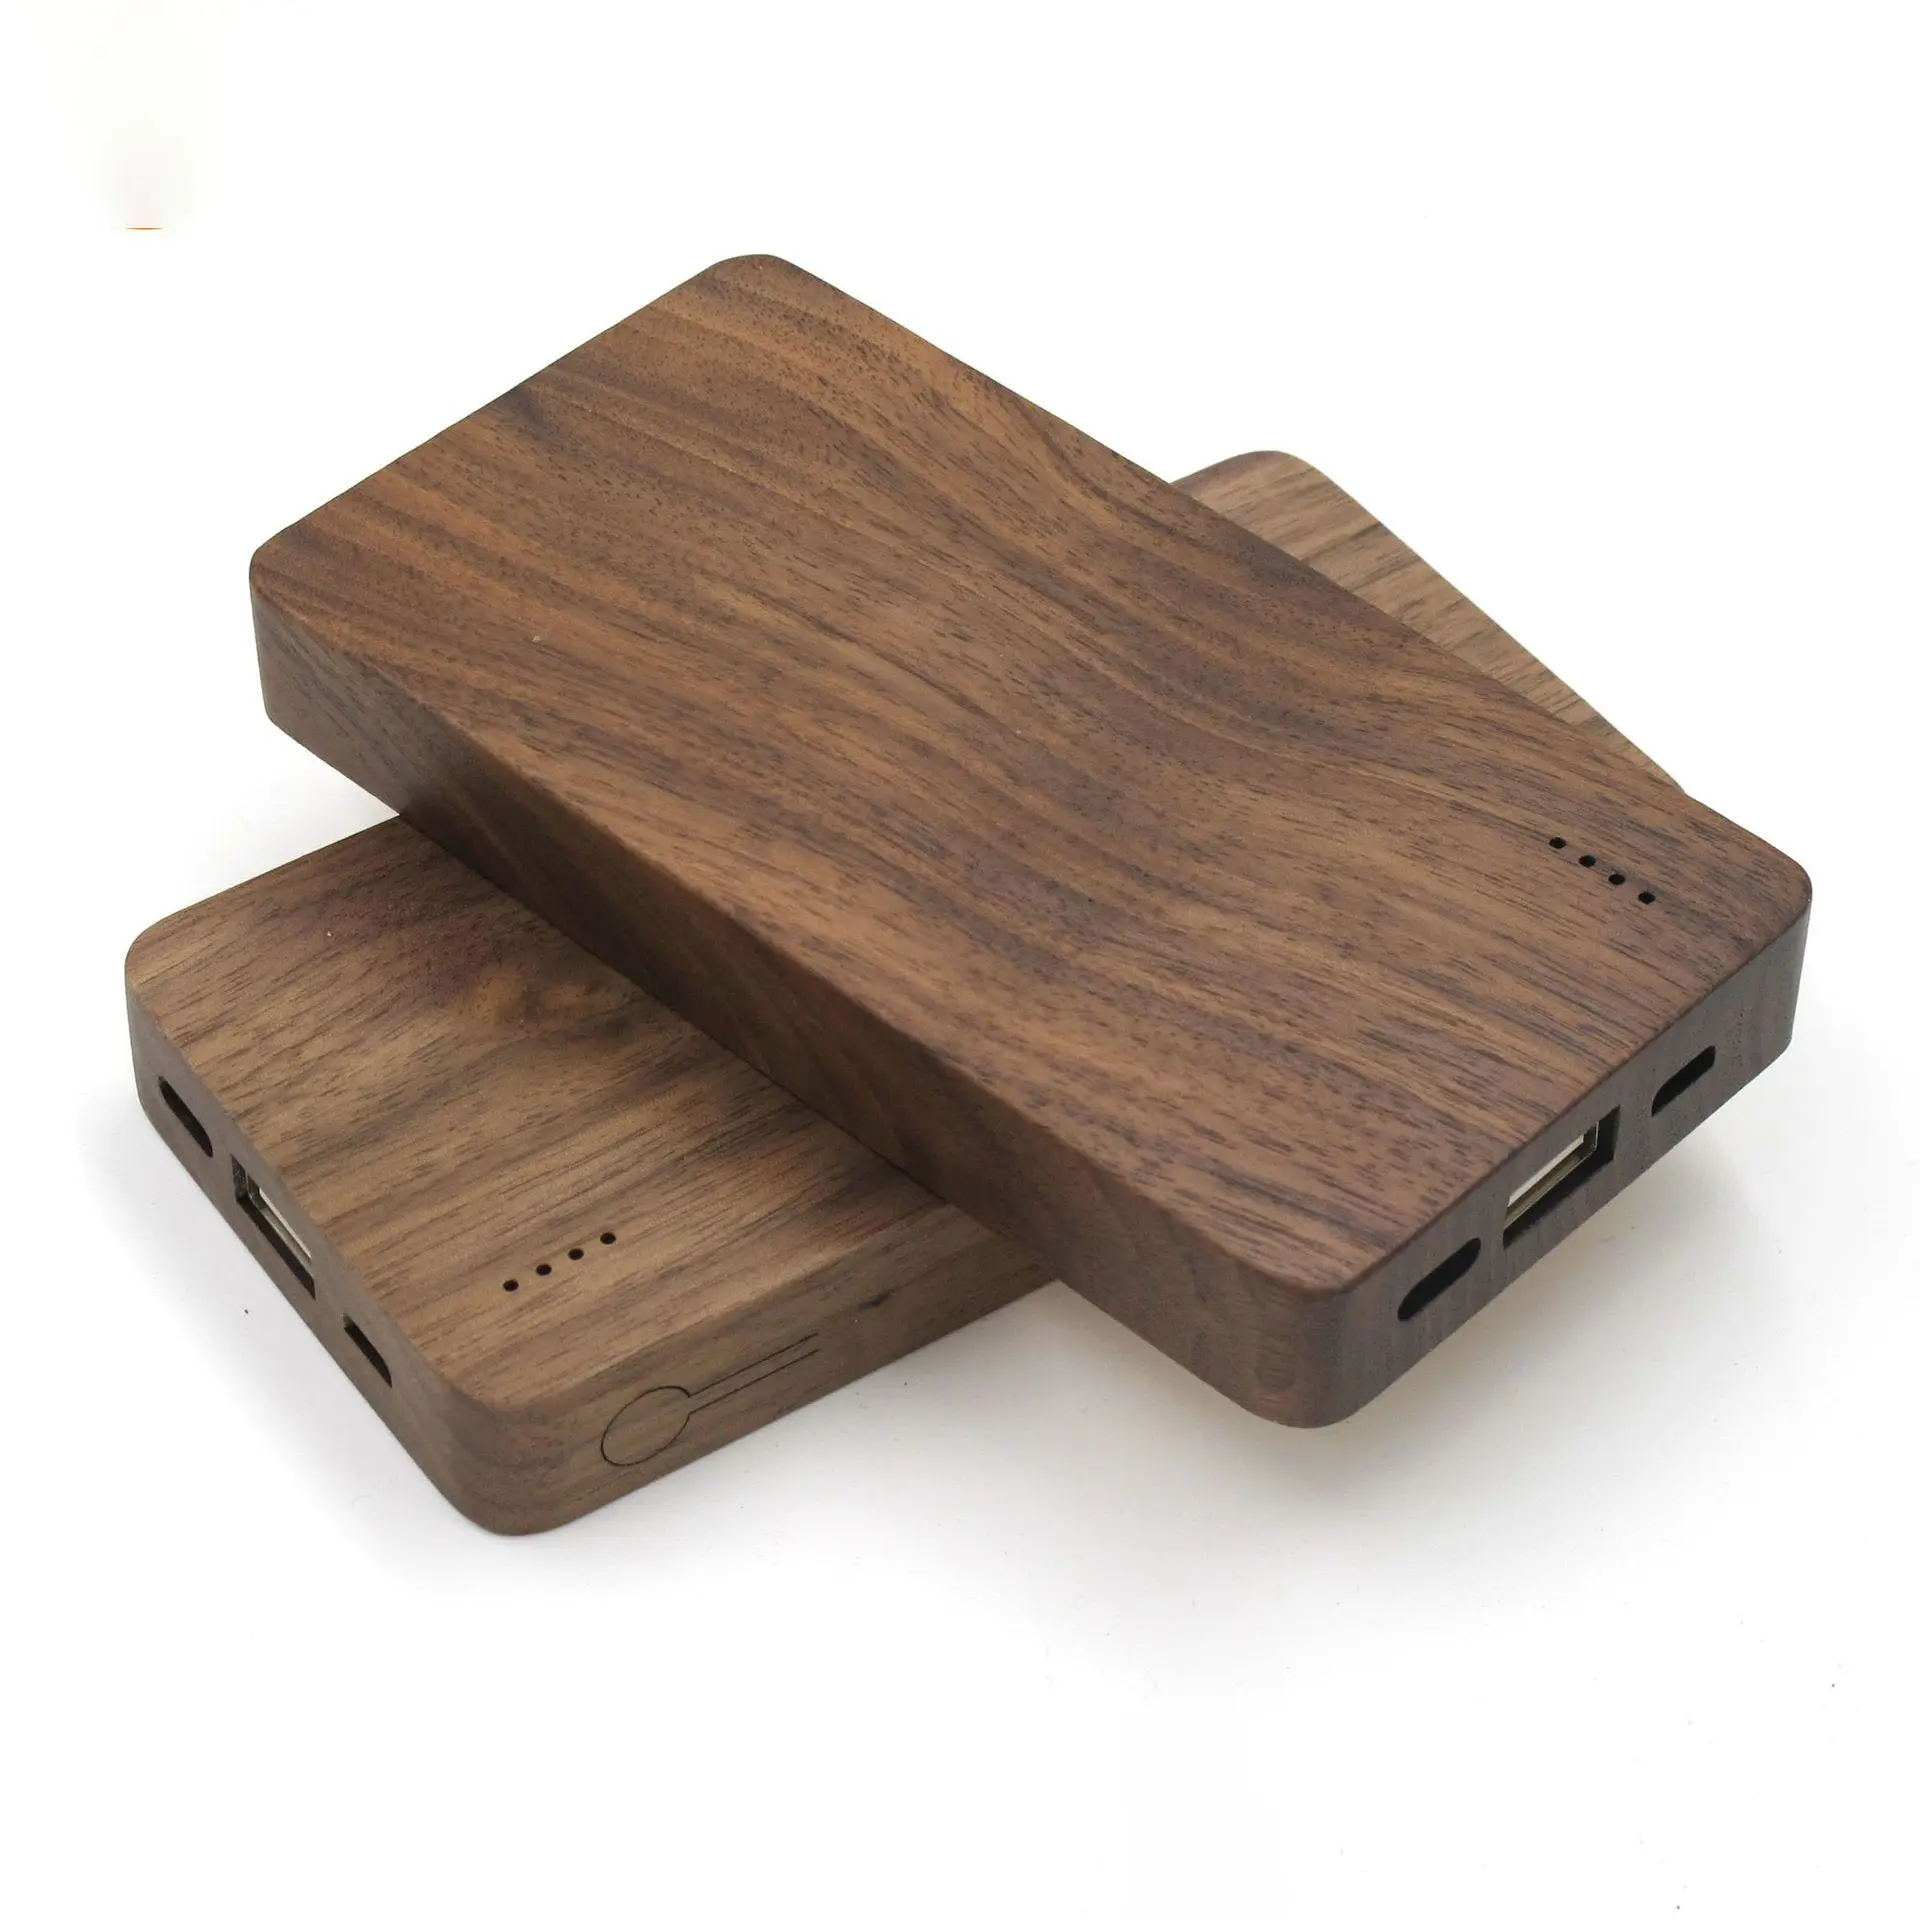 New wooden bamboo Power Bank 20000mAh Portable USB Powerbank Mobile Phone Charger Type c Back Power Banks